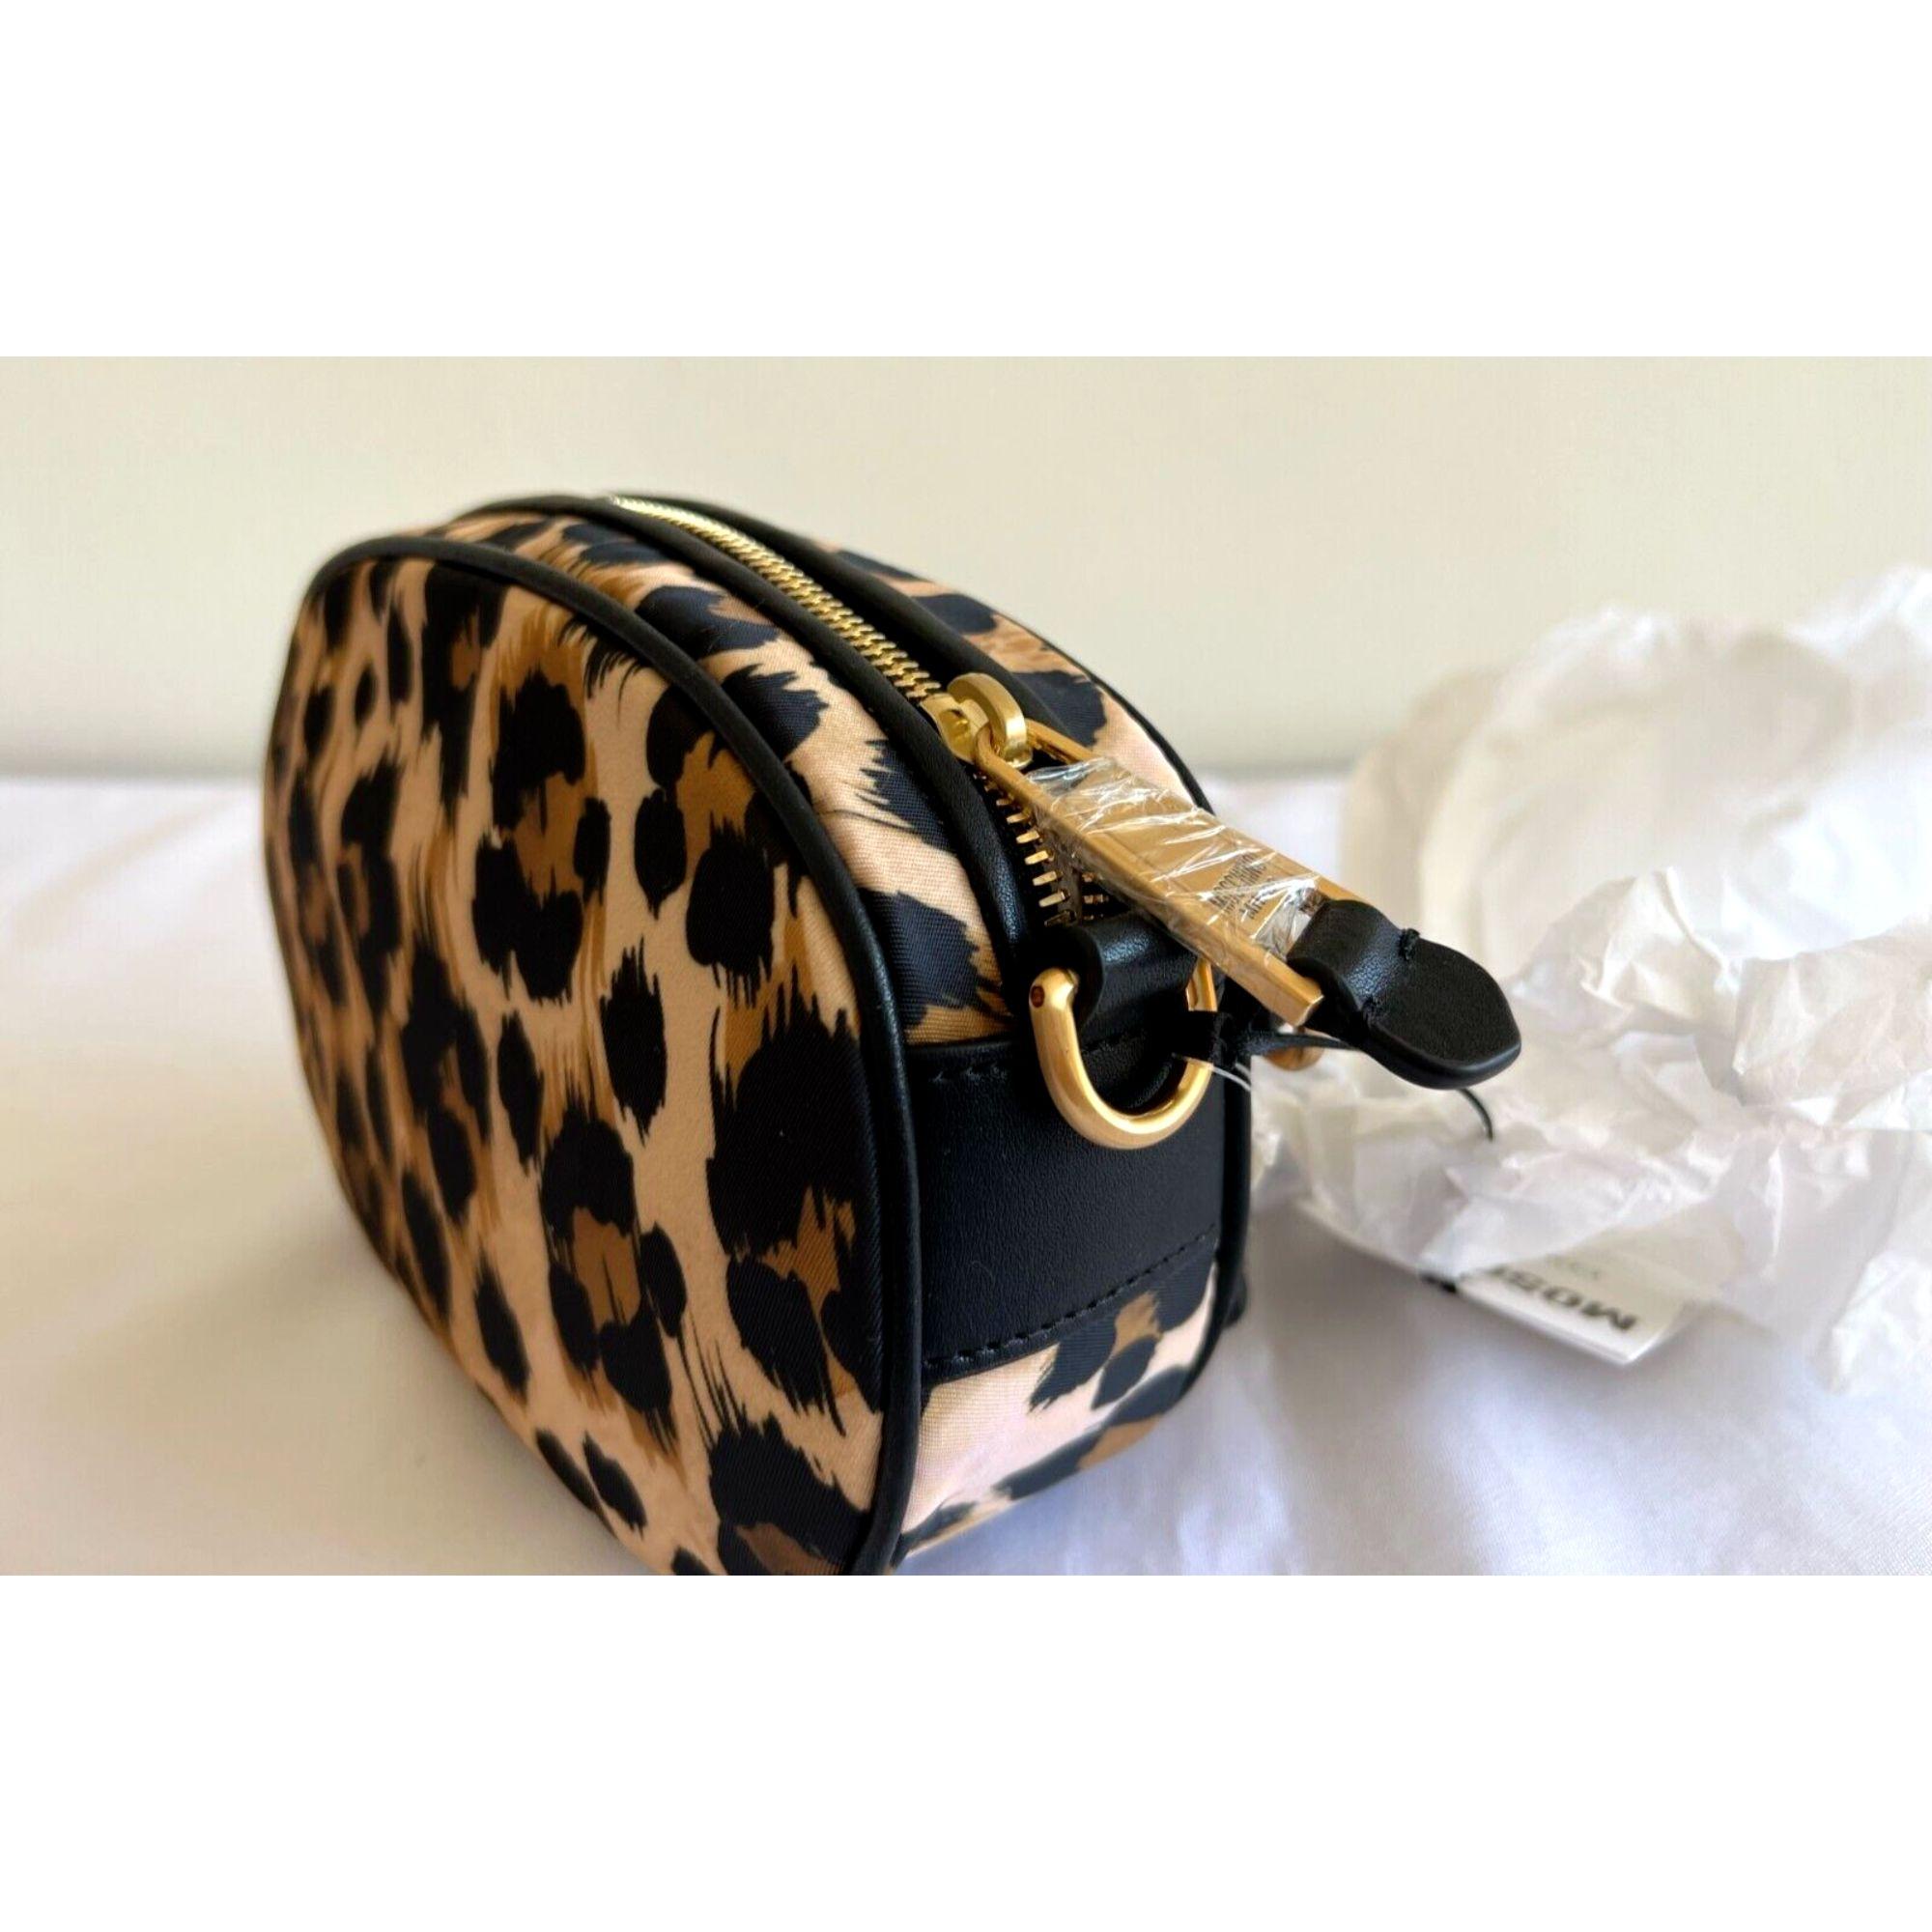 AW21 Moschino Couture Allover Leopard Print Shoulder Bag by Jeremy Scott For Sale 2